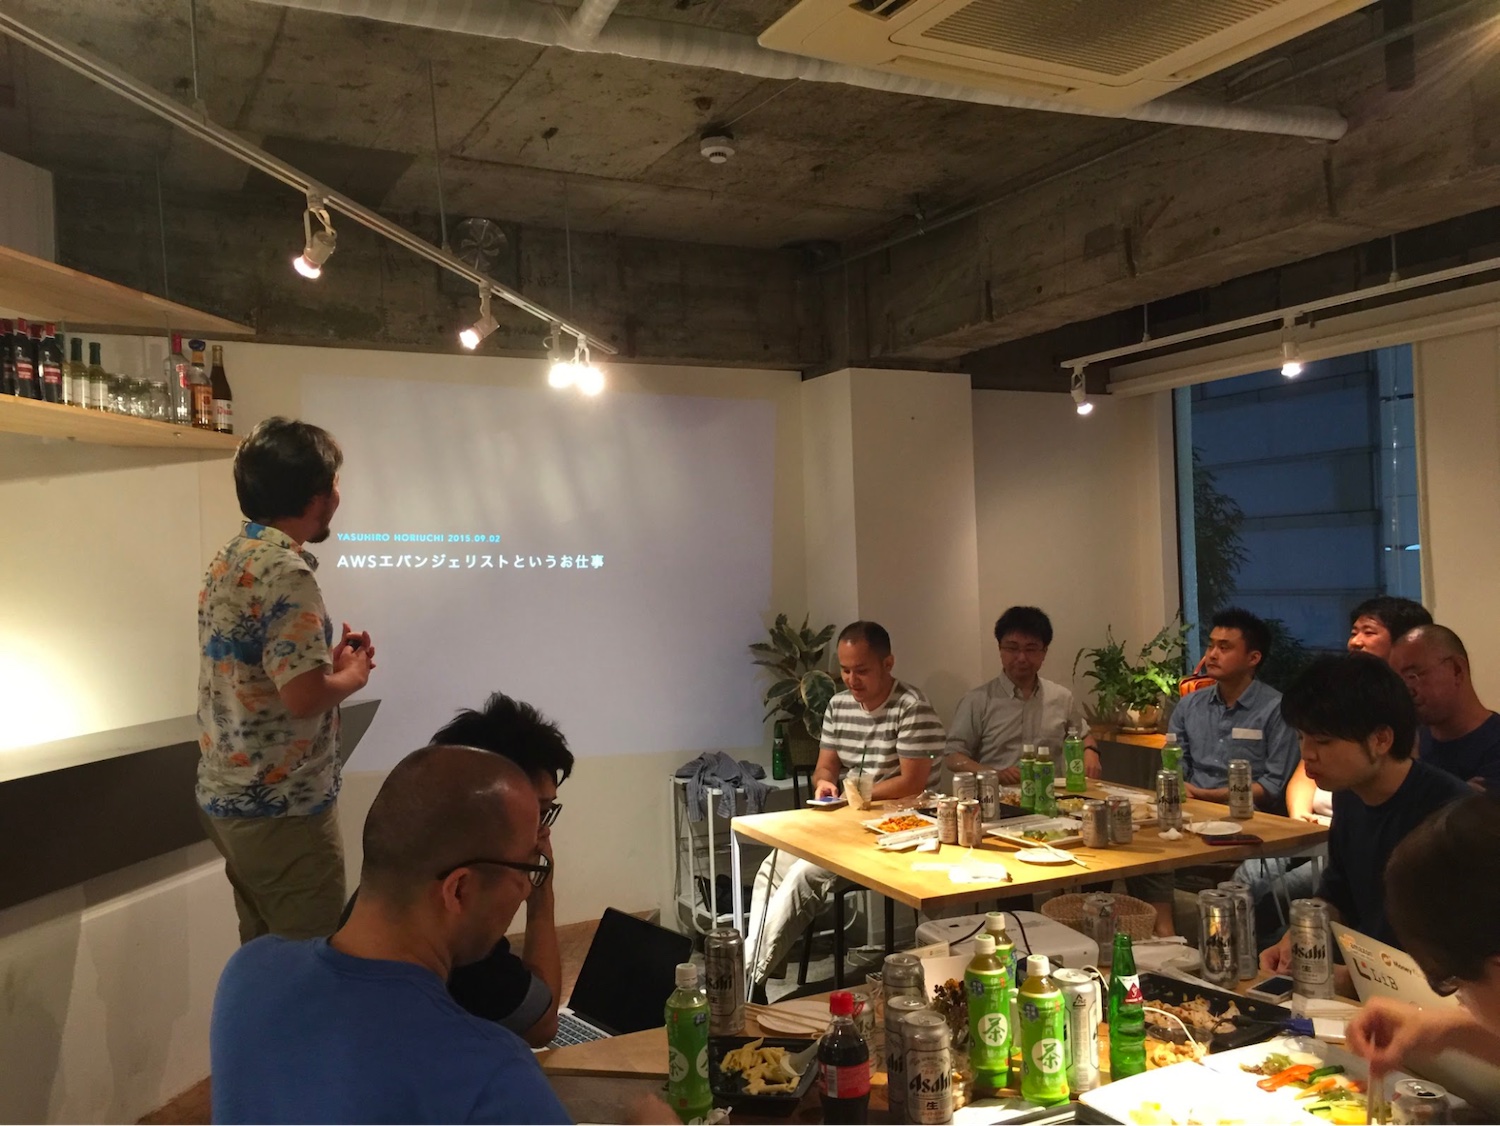 DevRel Meetup in Tokyo #1の様子。今はなき渋谷のConnecting The Dotsにて